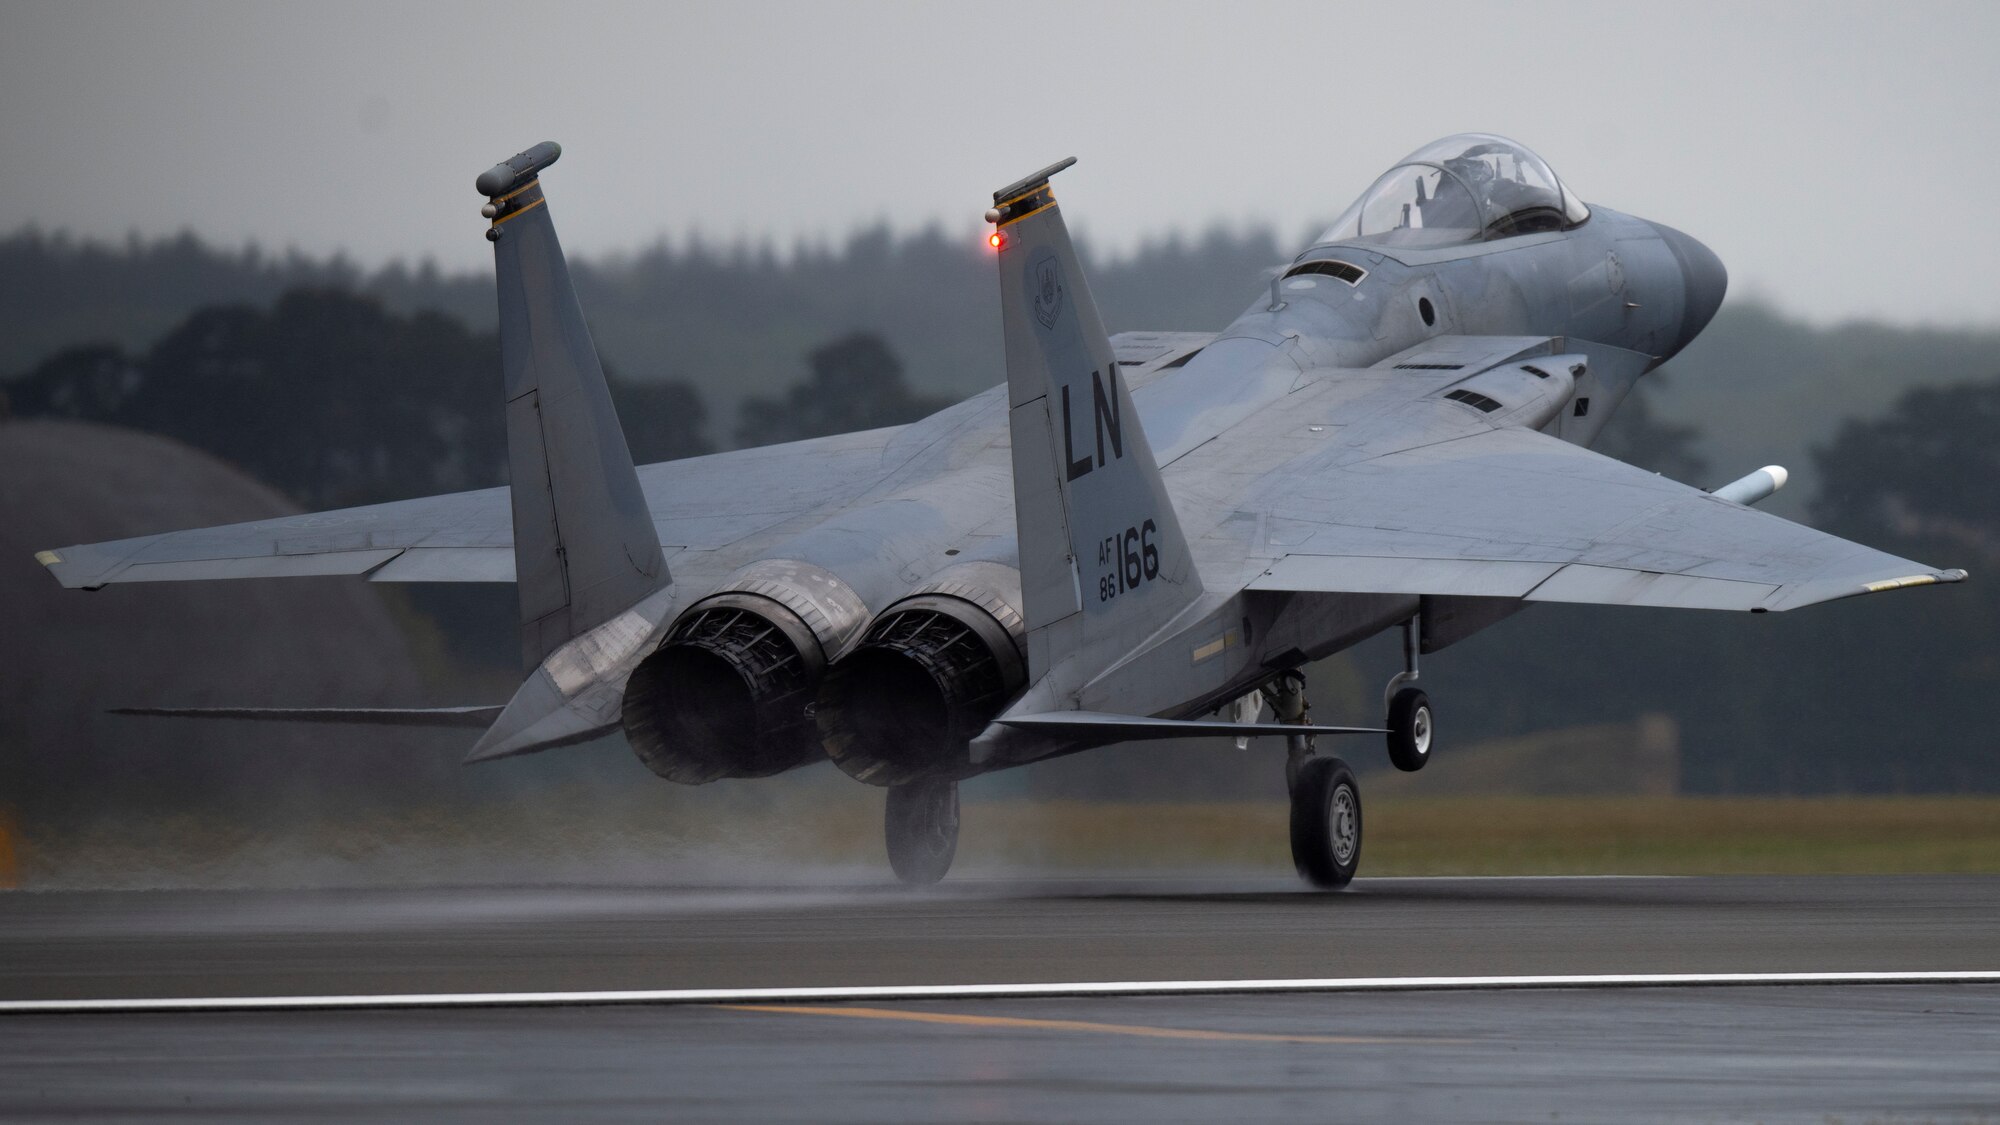 An F-15C Eagle assigned to the 493rd Fighter Squadron lands at Royal Air Force Lakenheath, England, April 28, 2020. Despite the current COVID-19 crisis, the 48th Fighter Wing is committed to staying ready to deliver combat air power when called upon by U.S. Air Forces in Europe-Air Forces Africa. (U.S. Air Force photo by Airman 1st Class Jessi Monte)